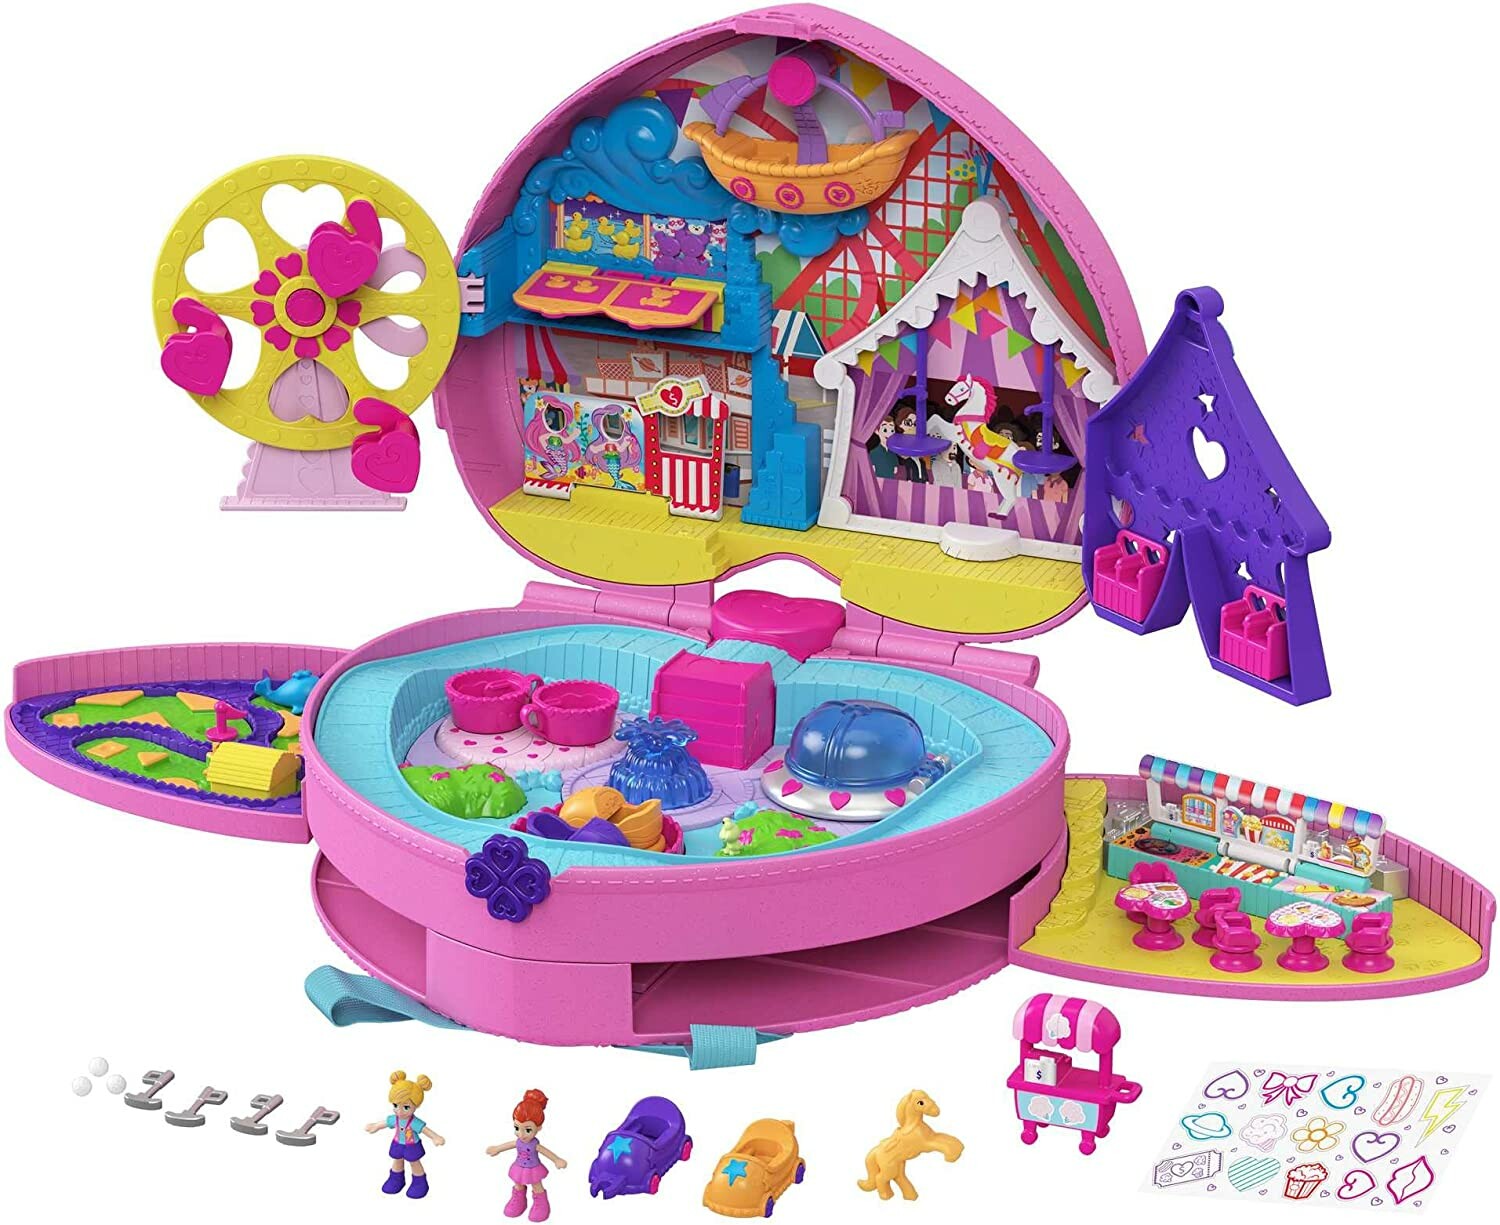 POLLY POCKET - COFFRET MULTIFACETTES GLACE